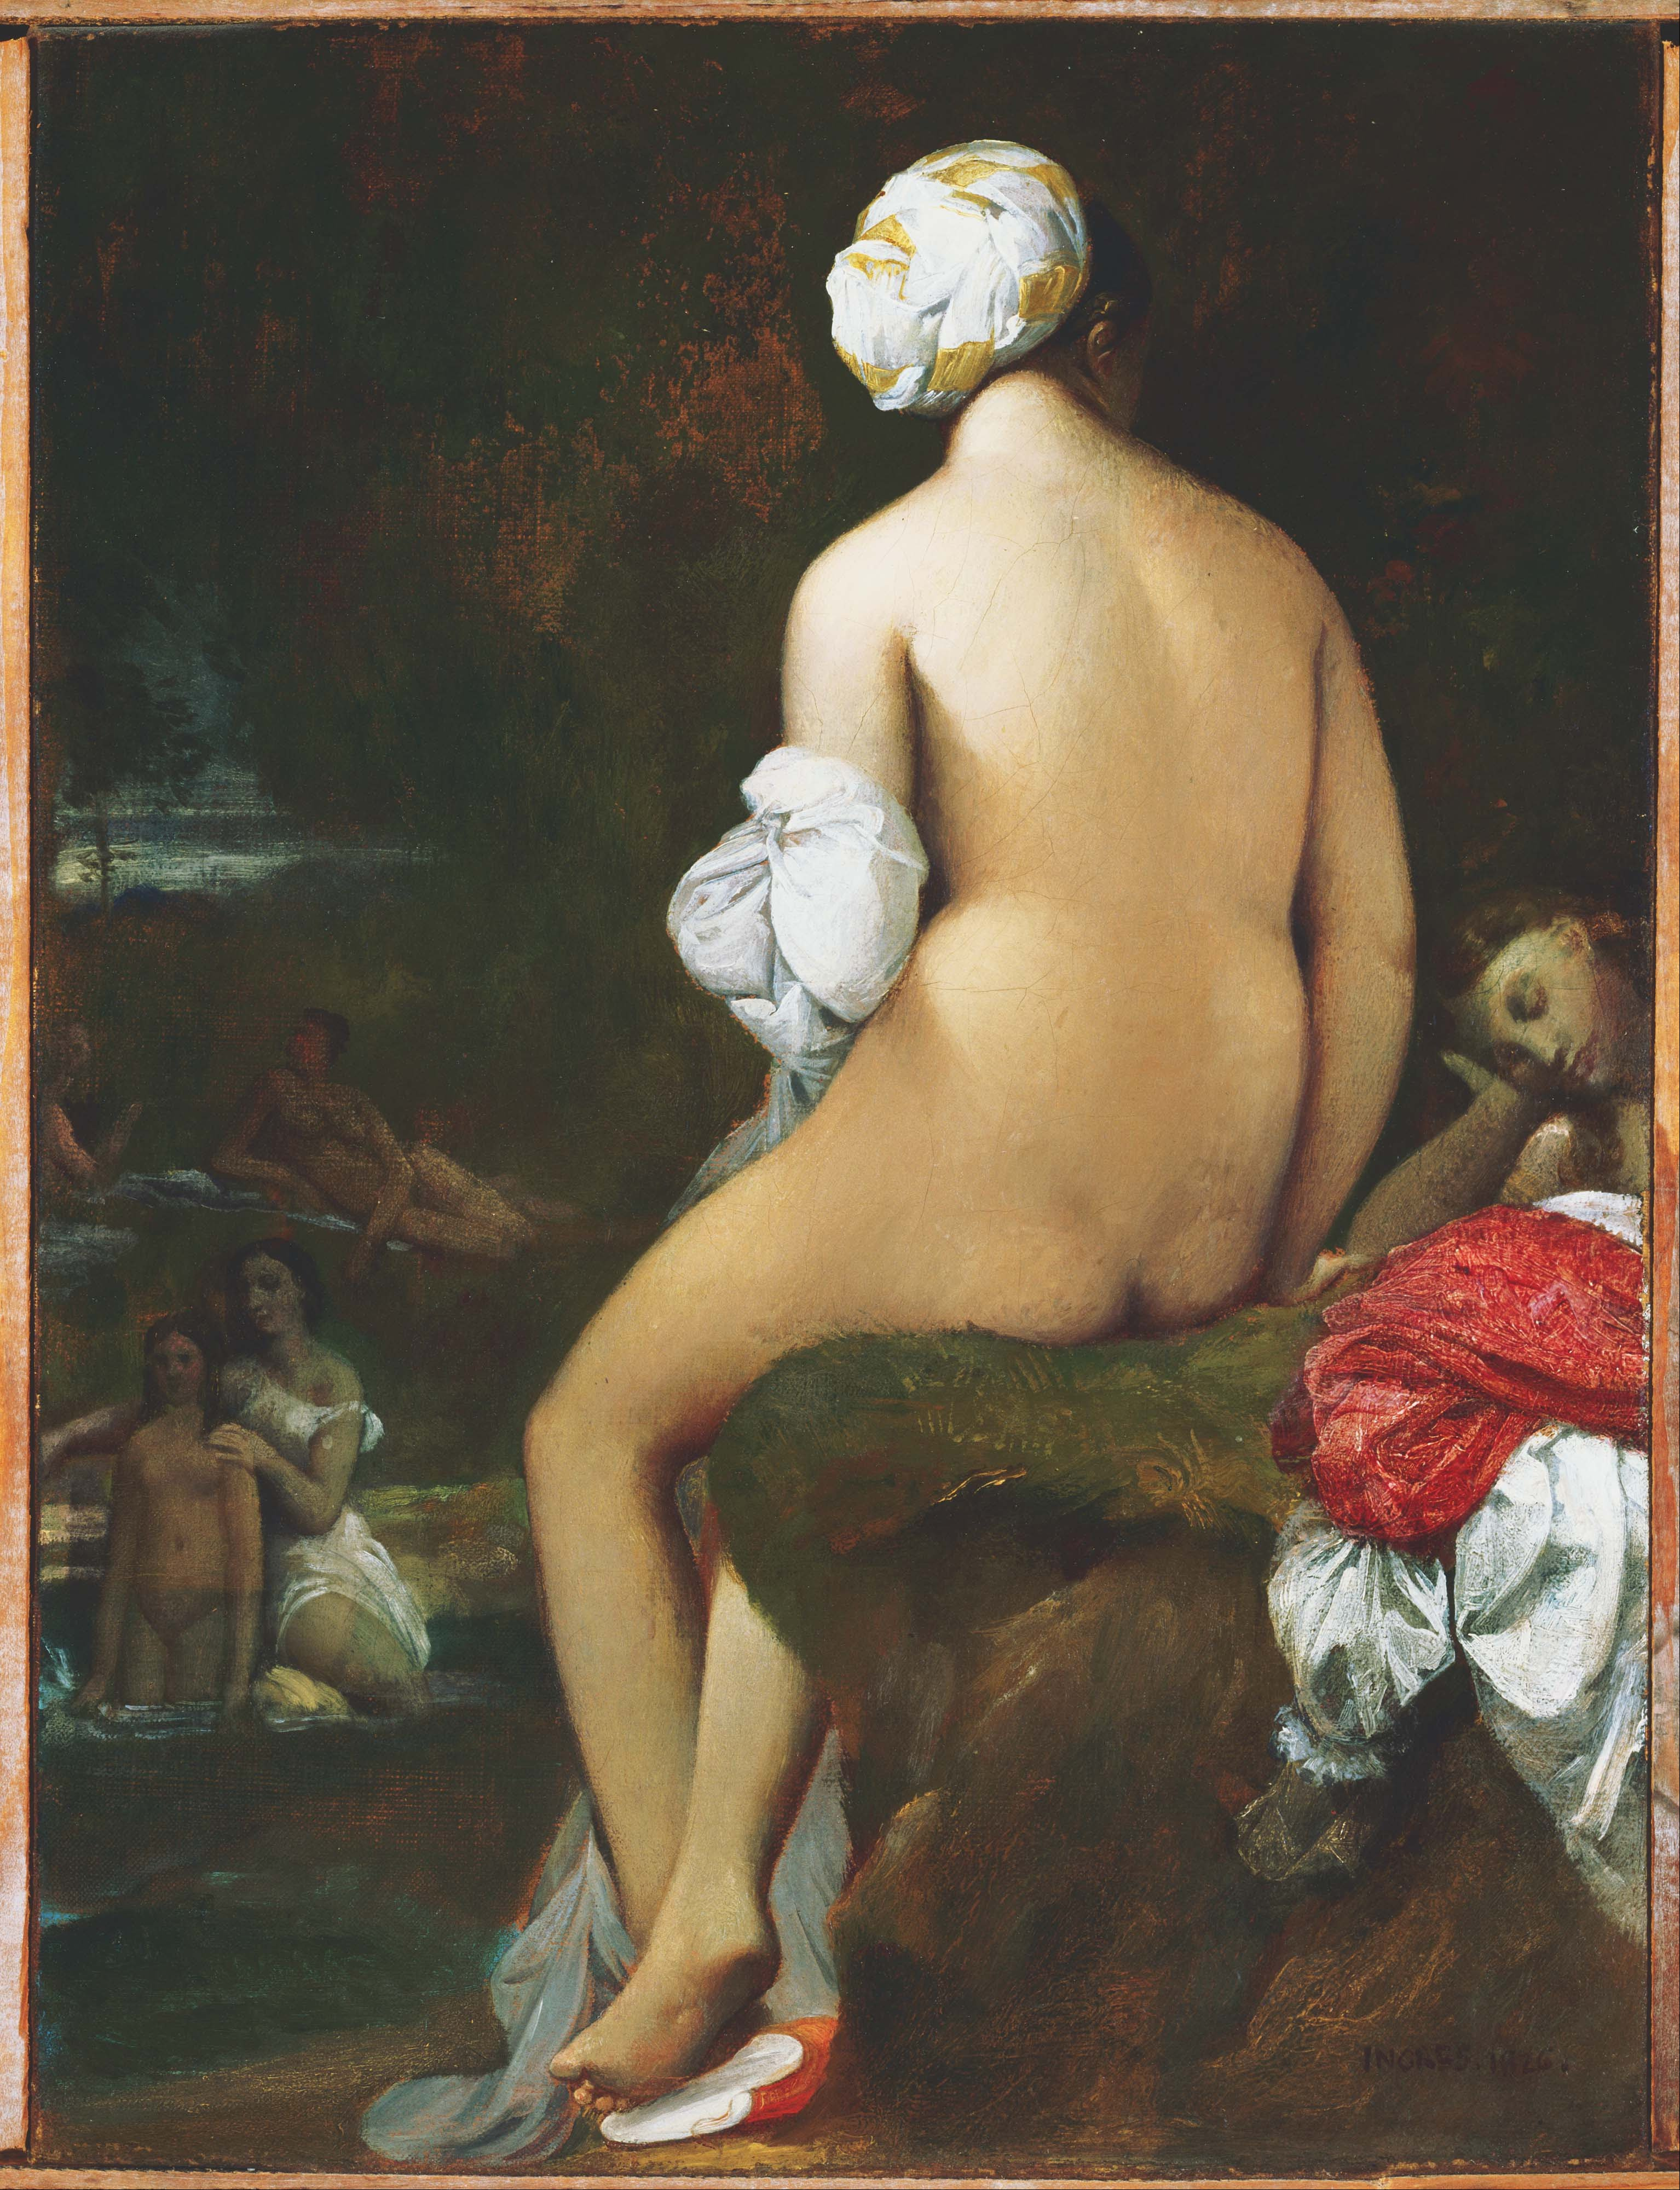 The Small Bather by Jean-Auguste-Dominique Ingres - 1826 - 9.88 x 12.88 in The Phillips Collection